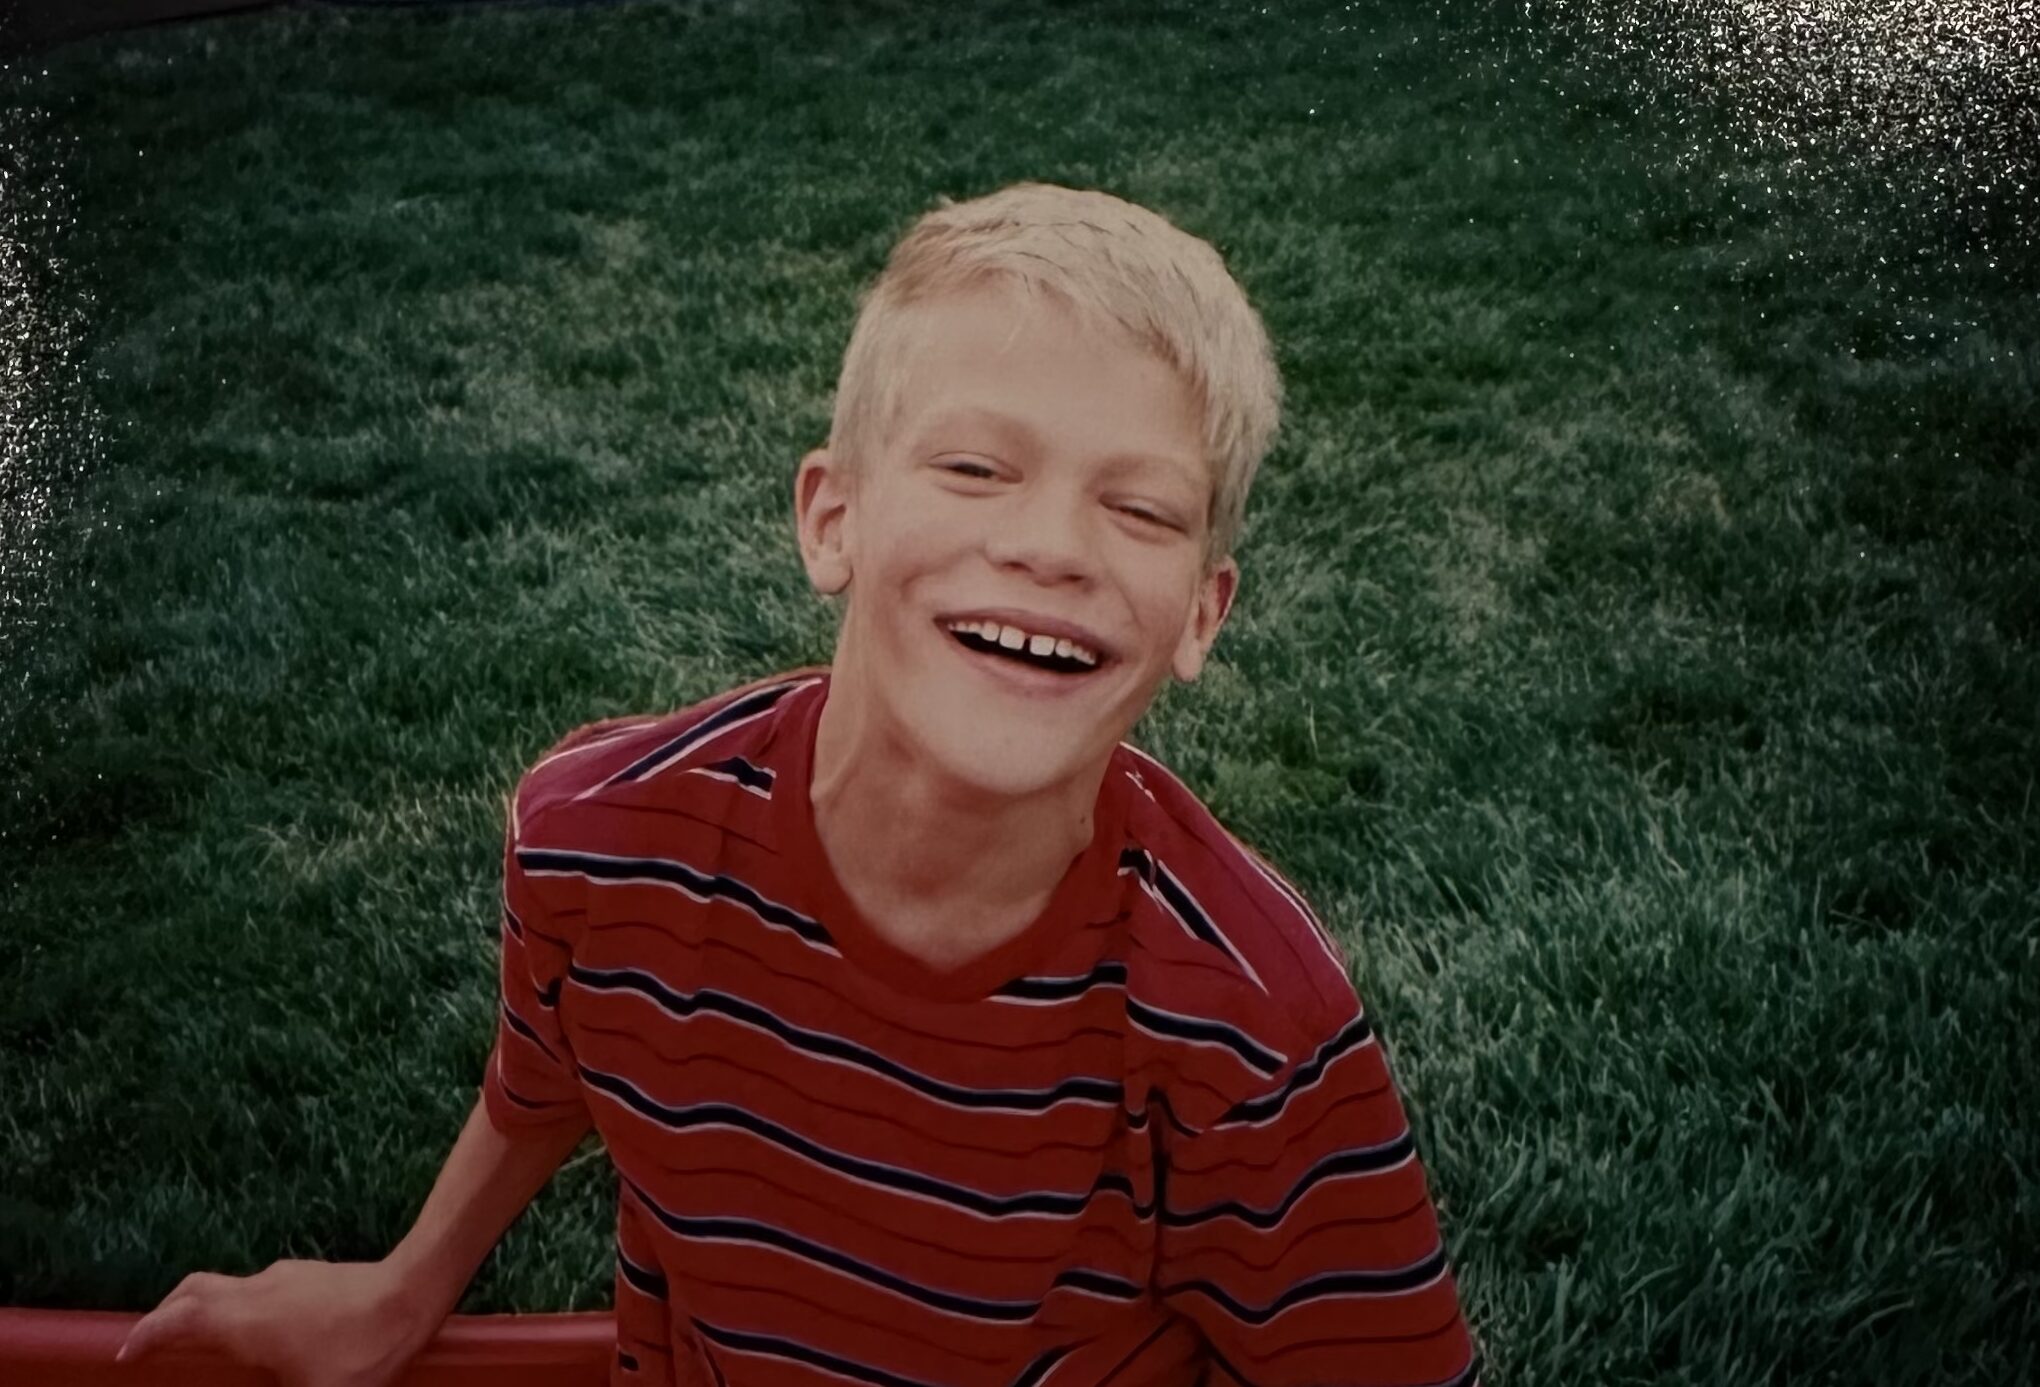 Brandon smiling during a nice summer day in the late 1990's